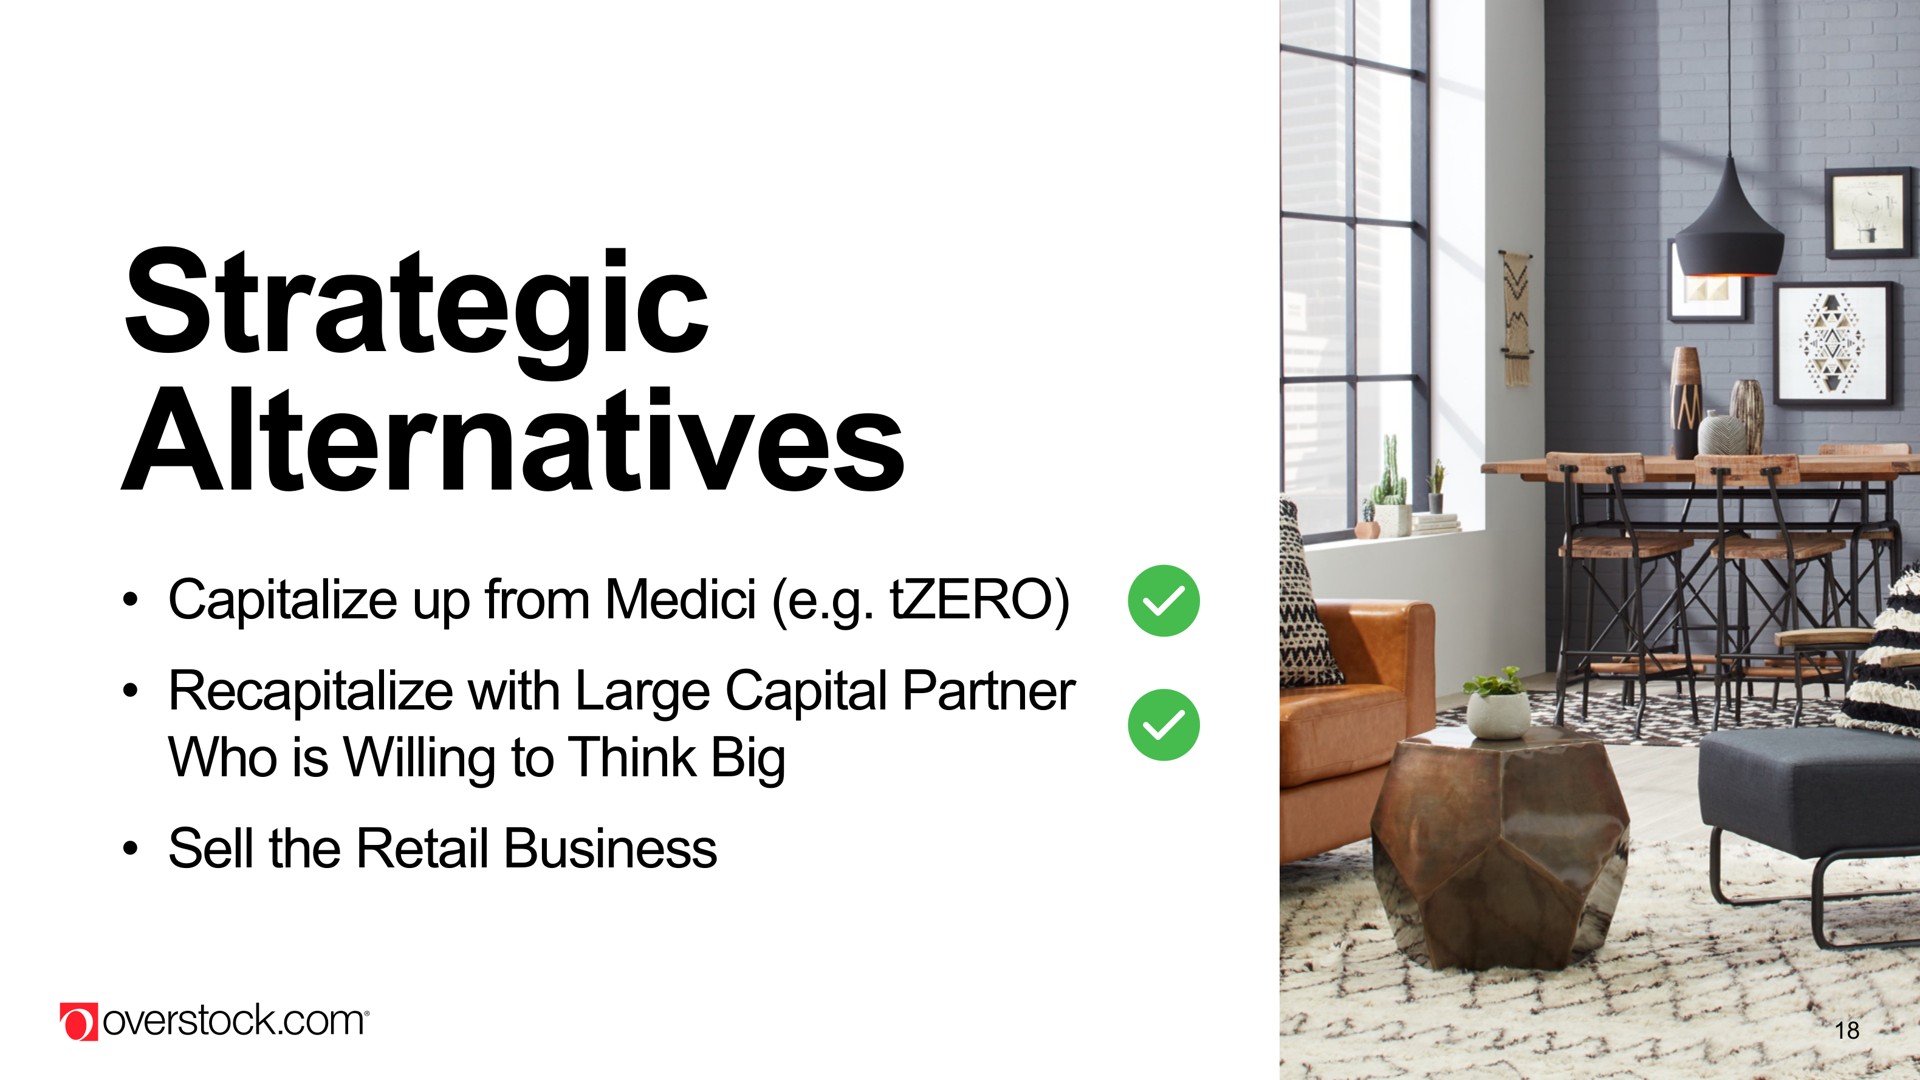 strategic alternatives capitalize up from recapitalize with large capital partner who is willing to think big sell the retail business | Overstock